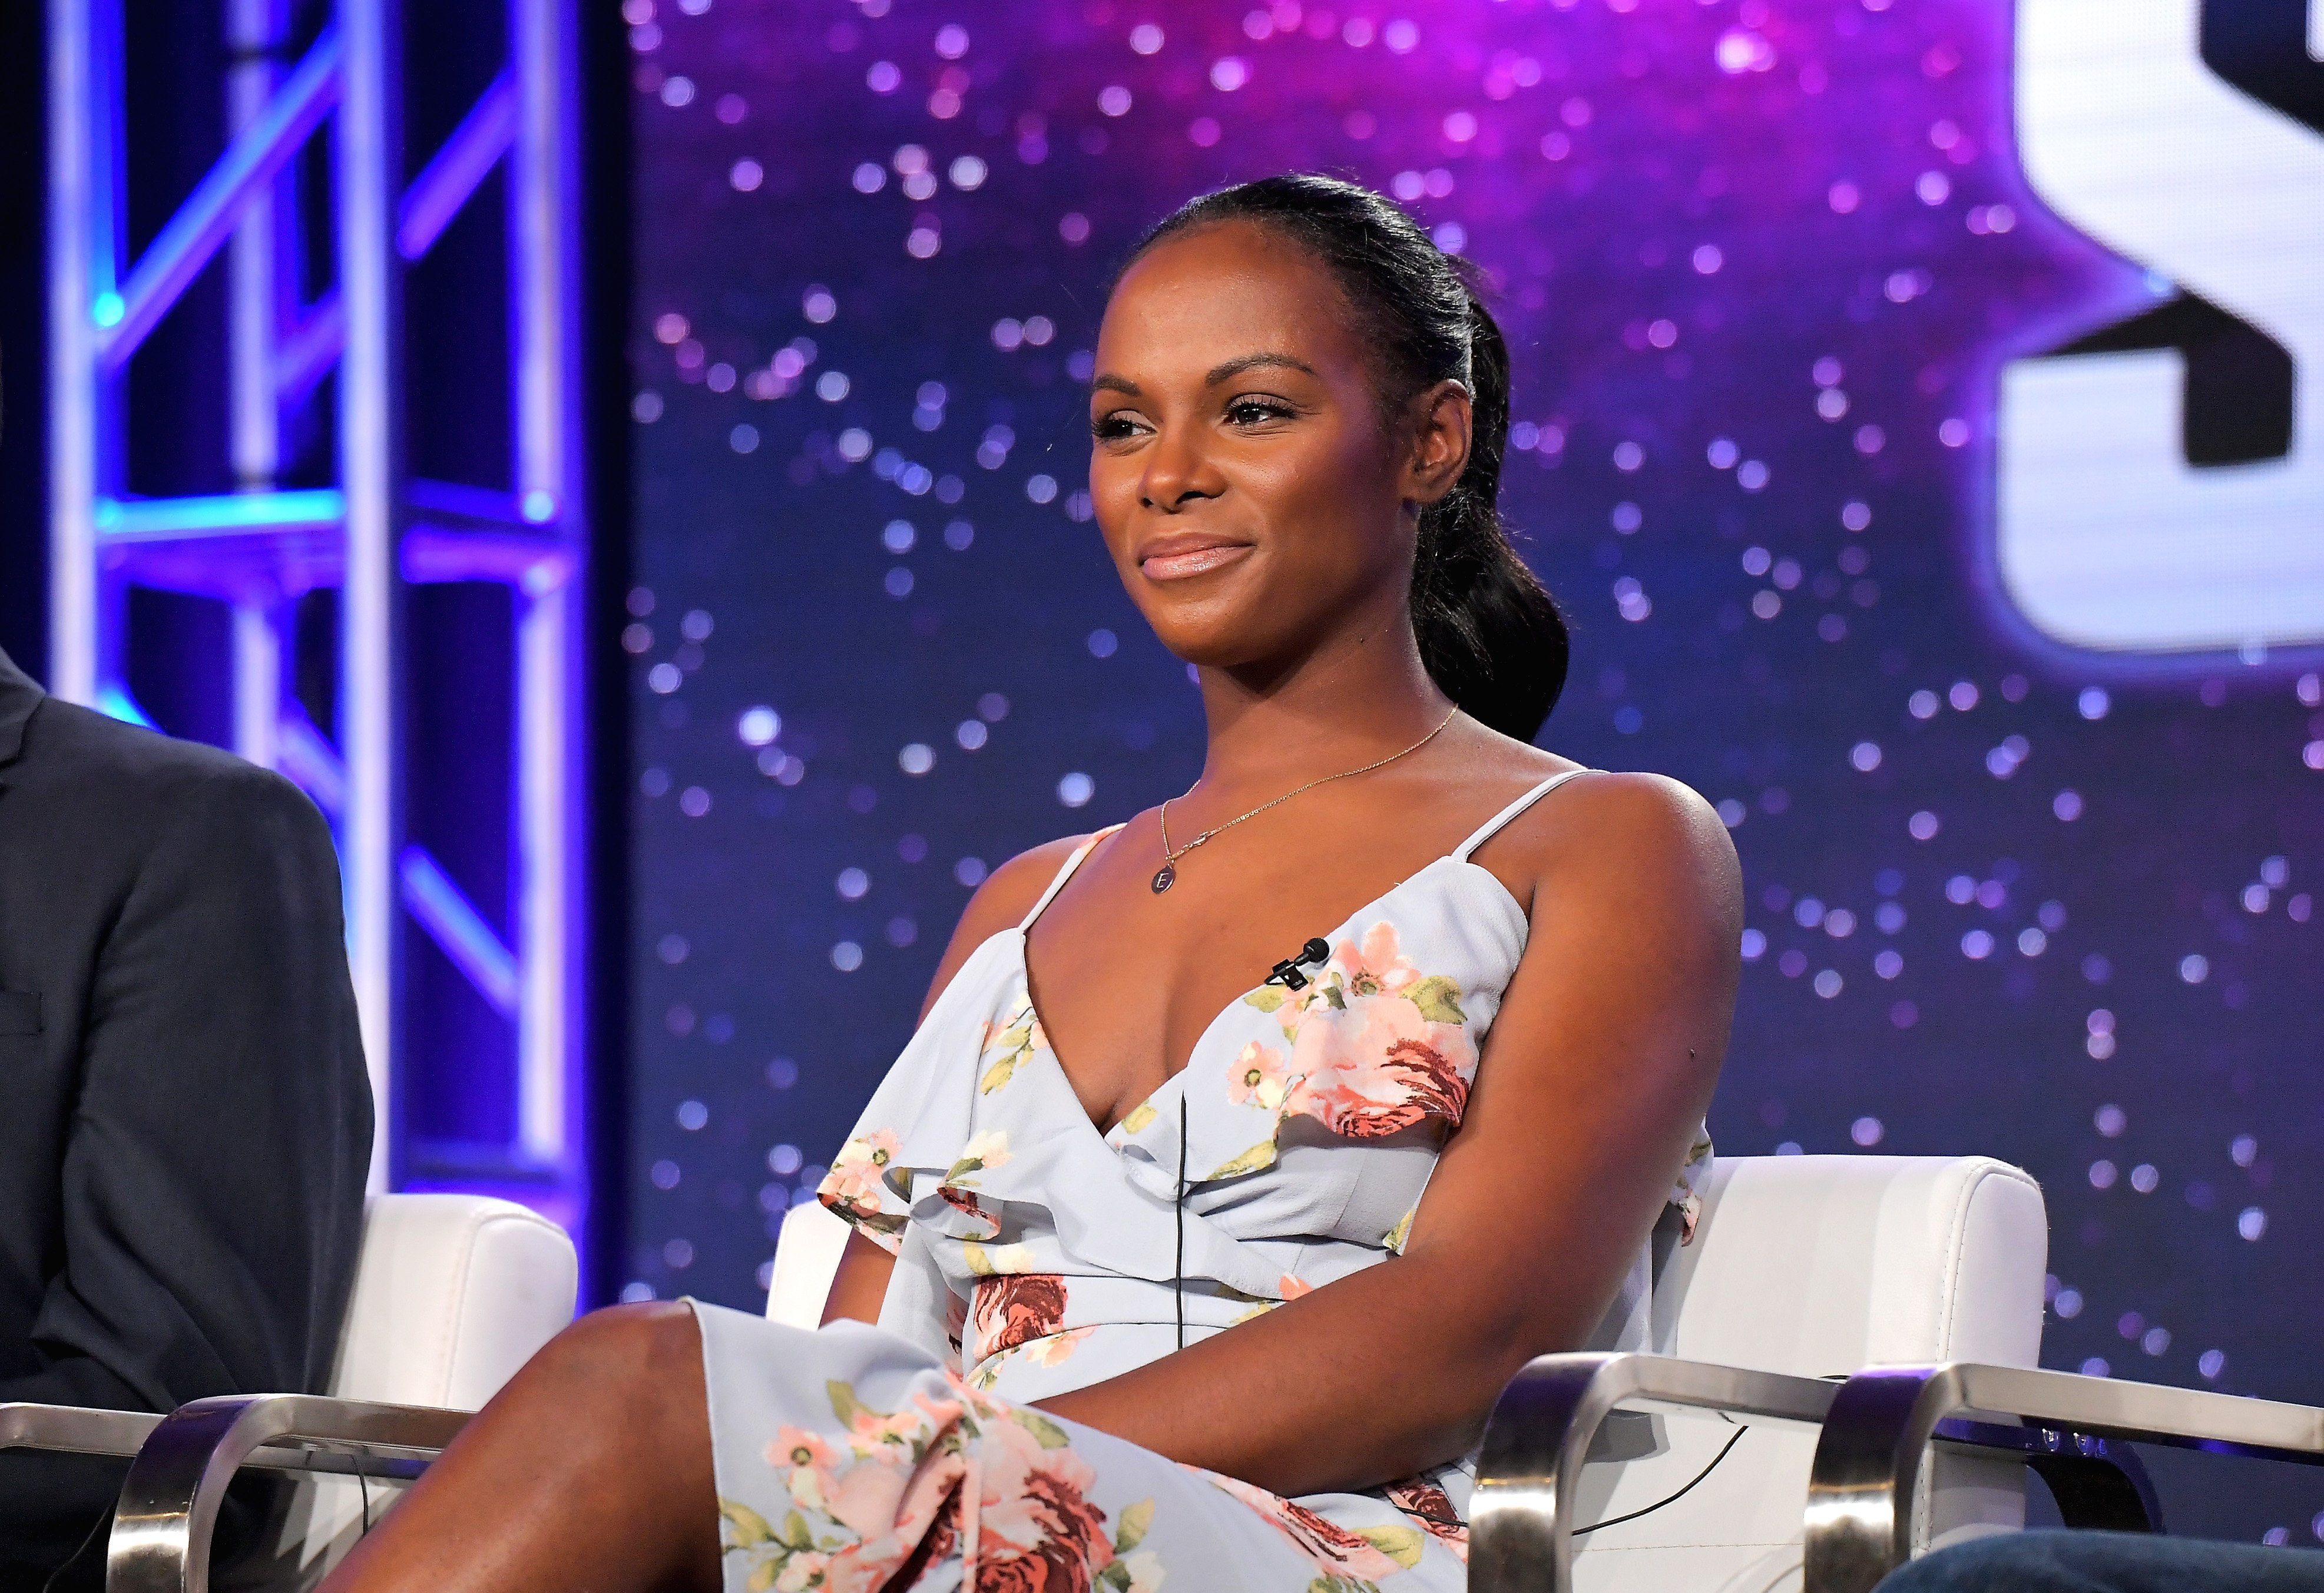 Tika Sumpter at the TCA Turner Winter Press Tour 2018 Presentation on January 11, 2018 | Photo: GettyImages